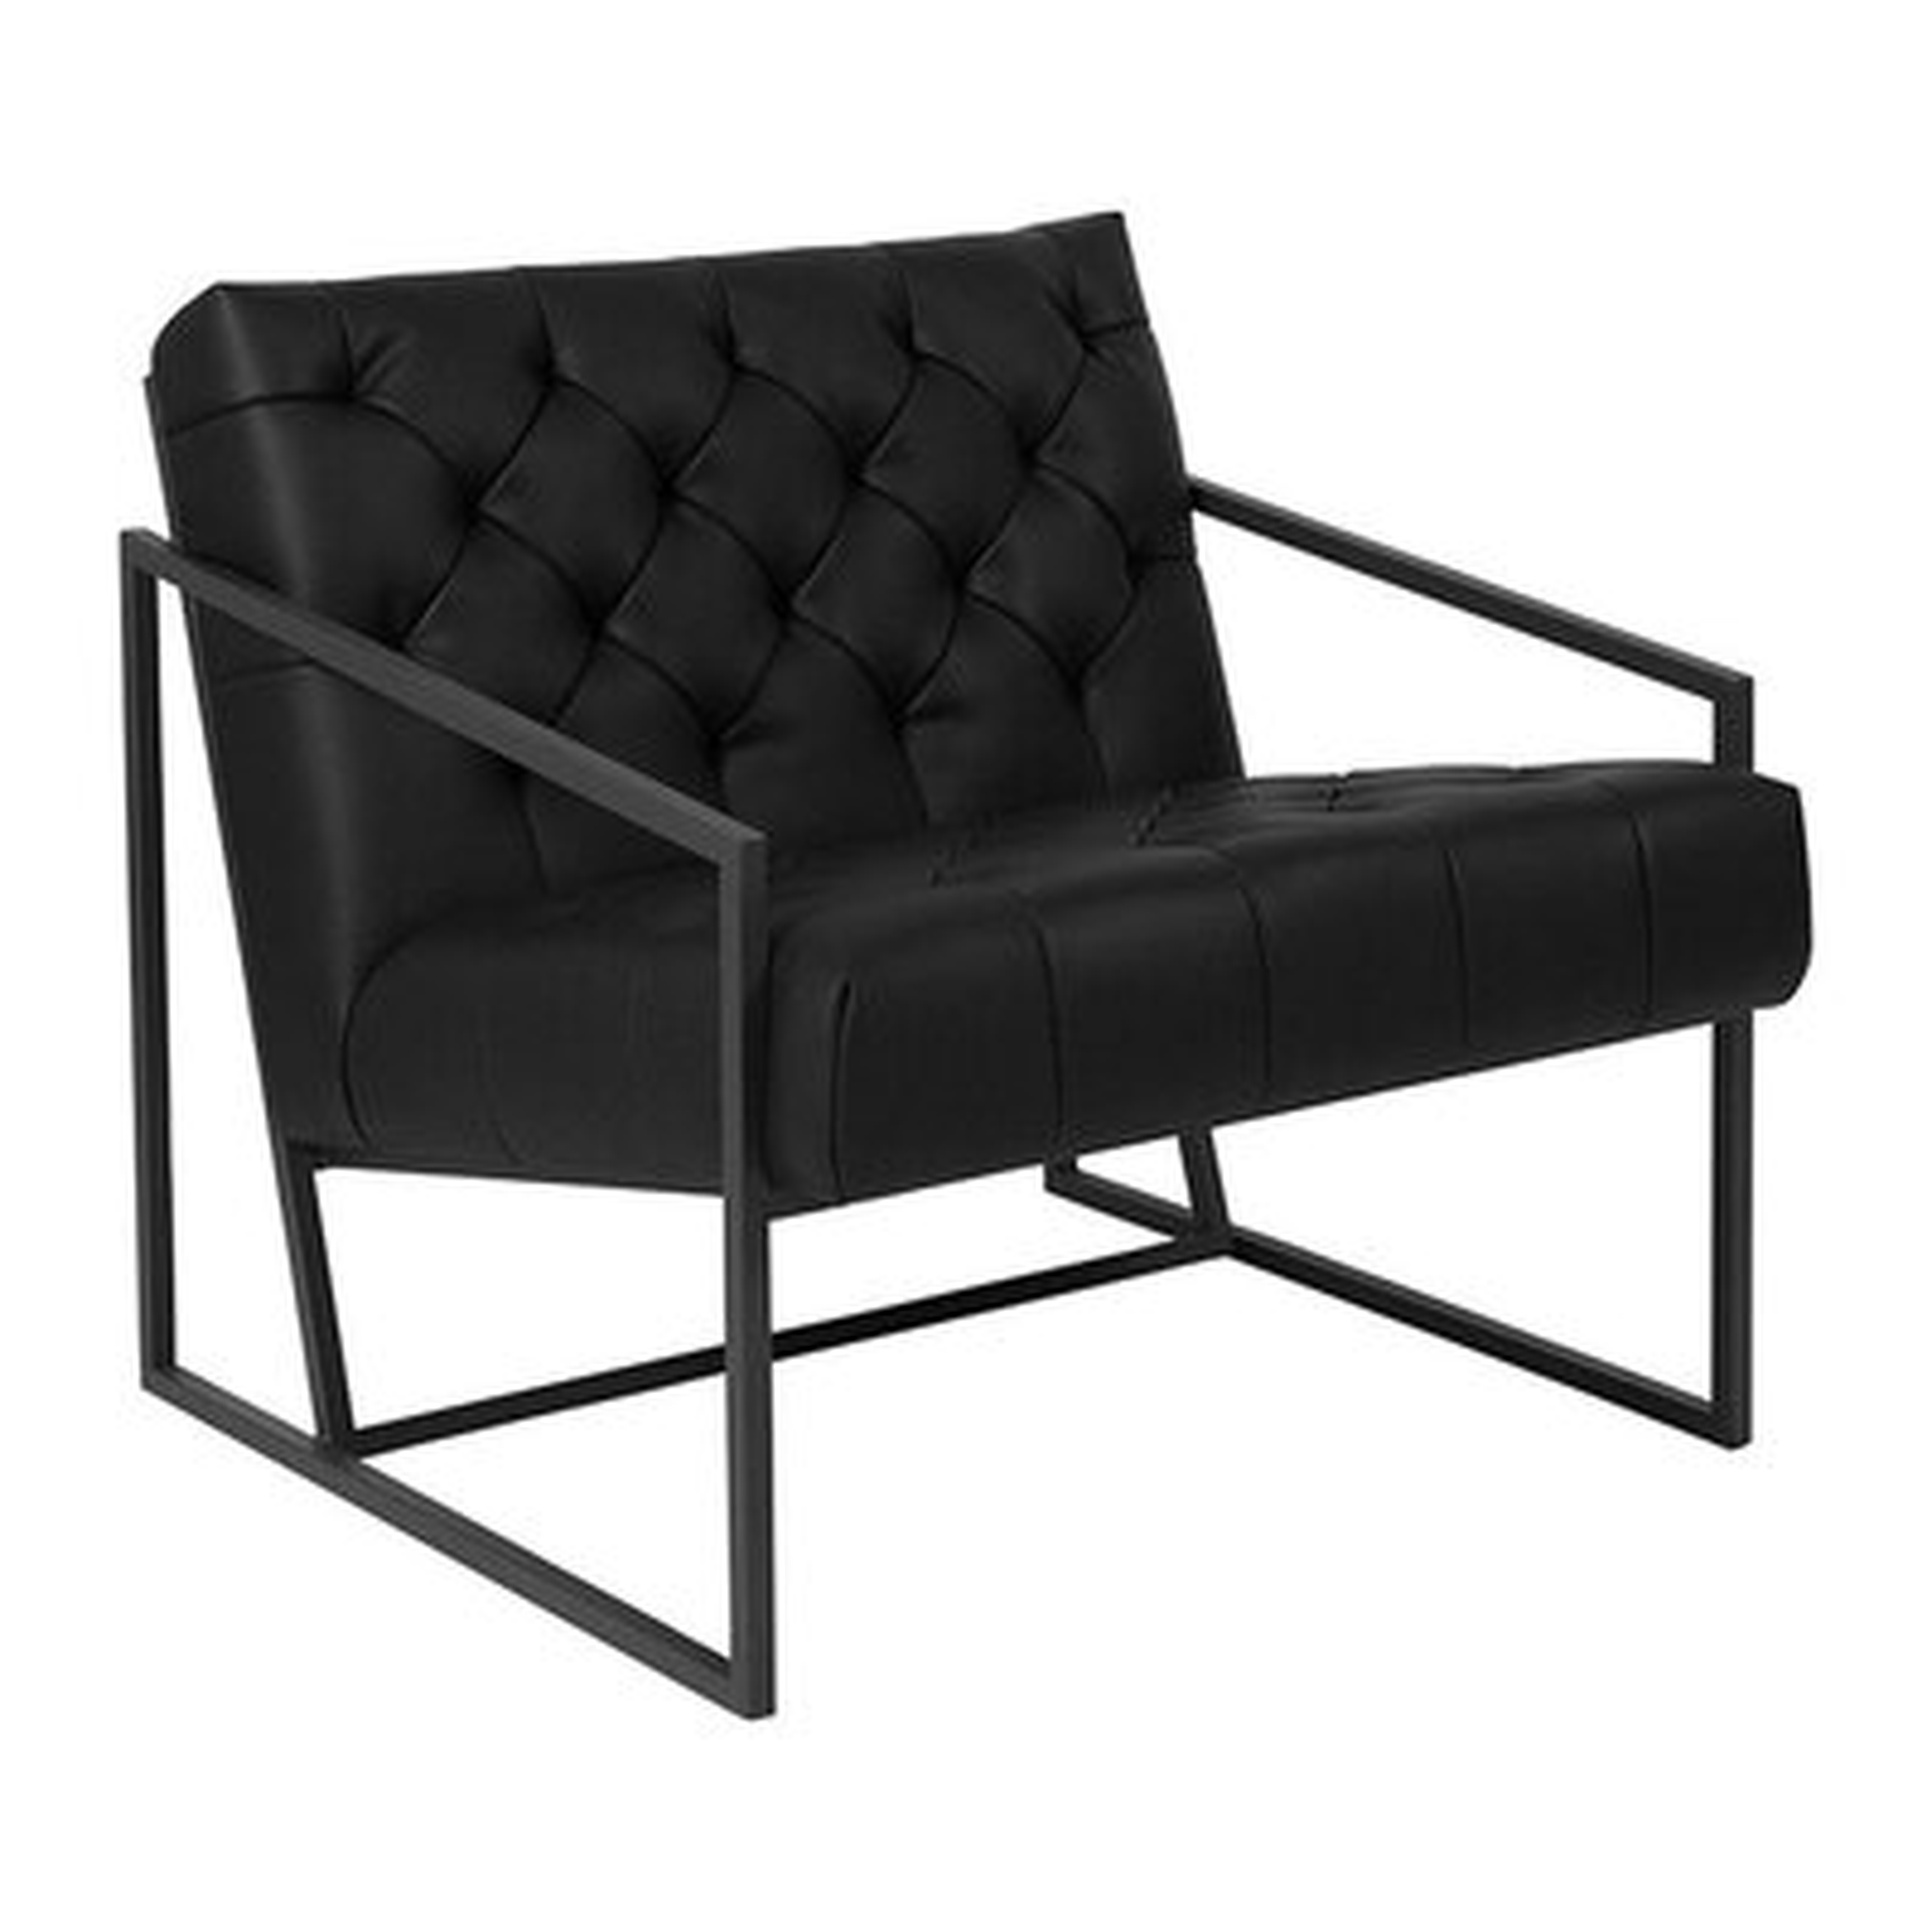 George Oliver Transitional Black Leather Tufted Lounge Chair - Wayfair